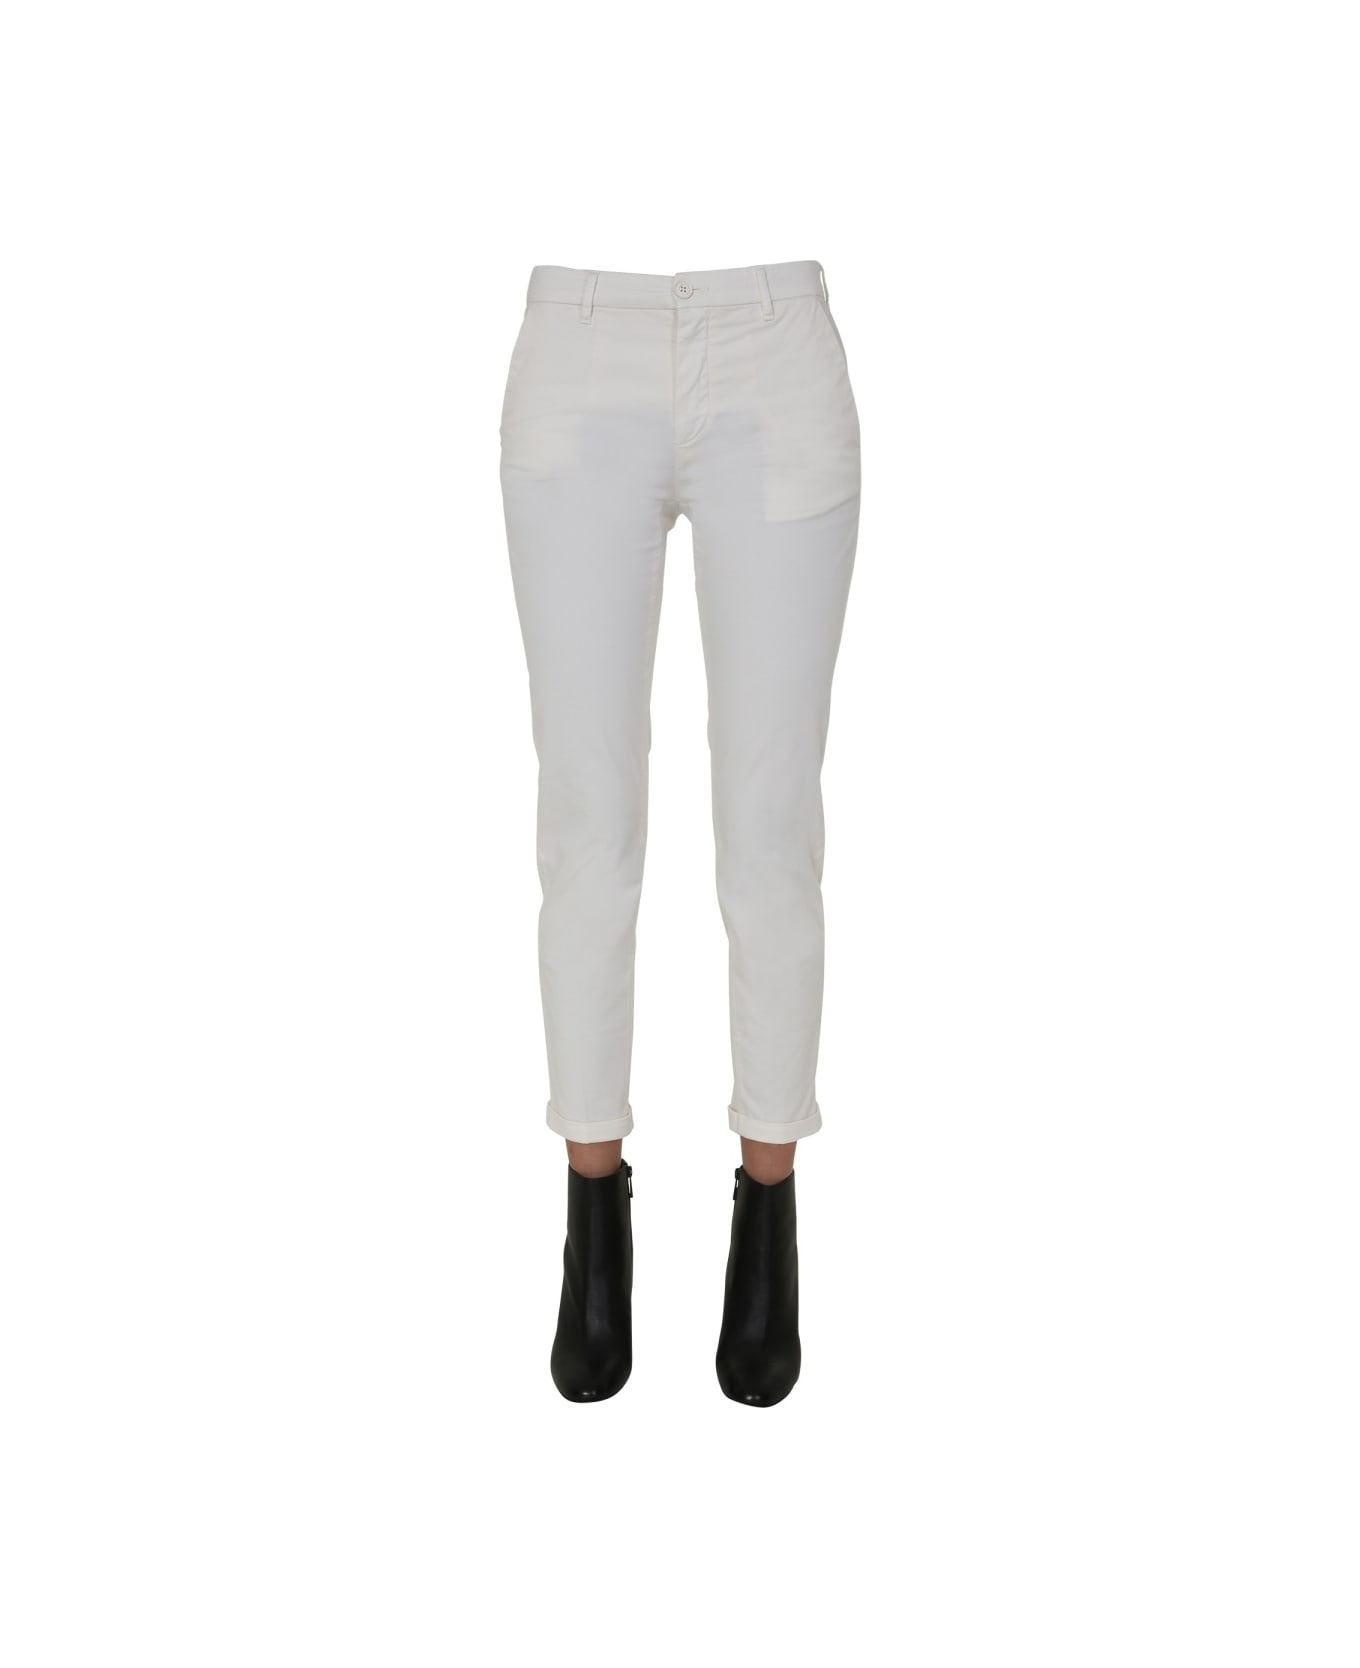 Pence "pooly / S" Trousers - WHITE